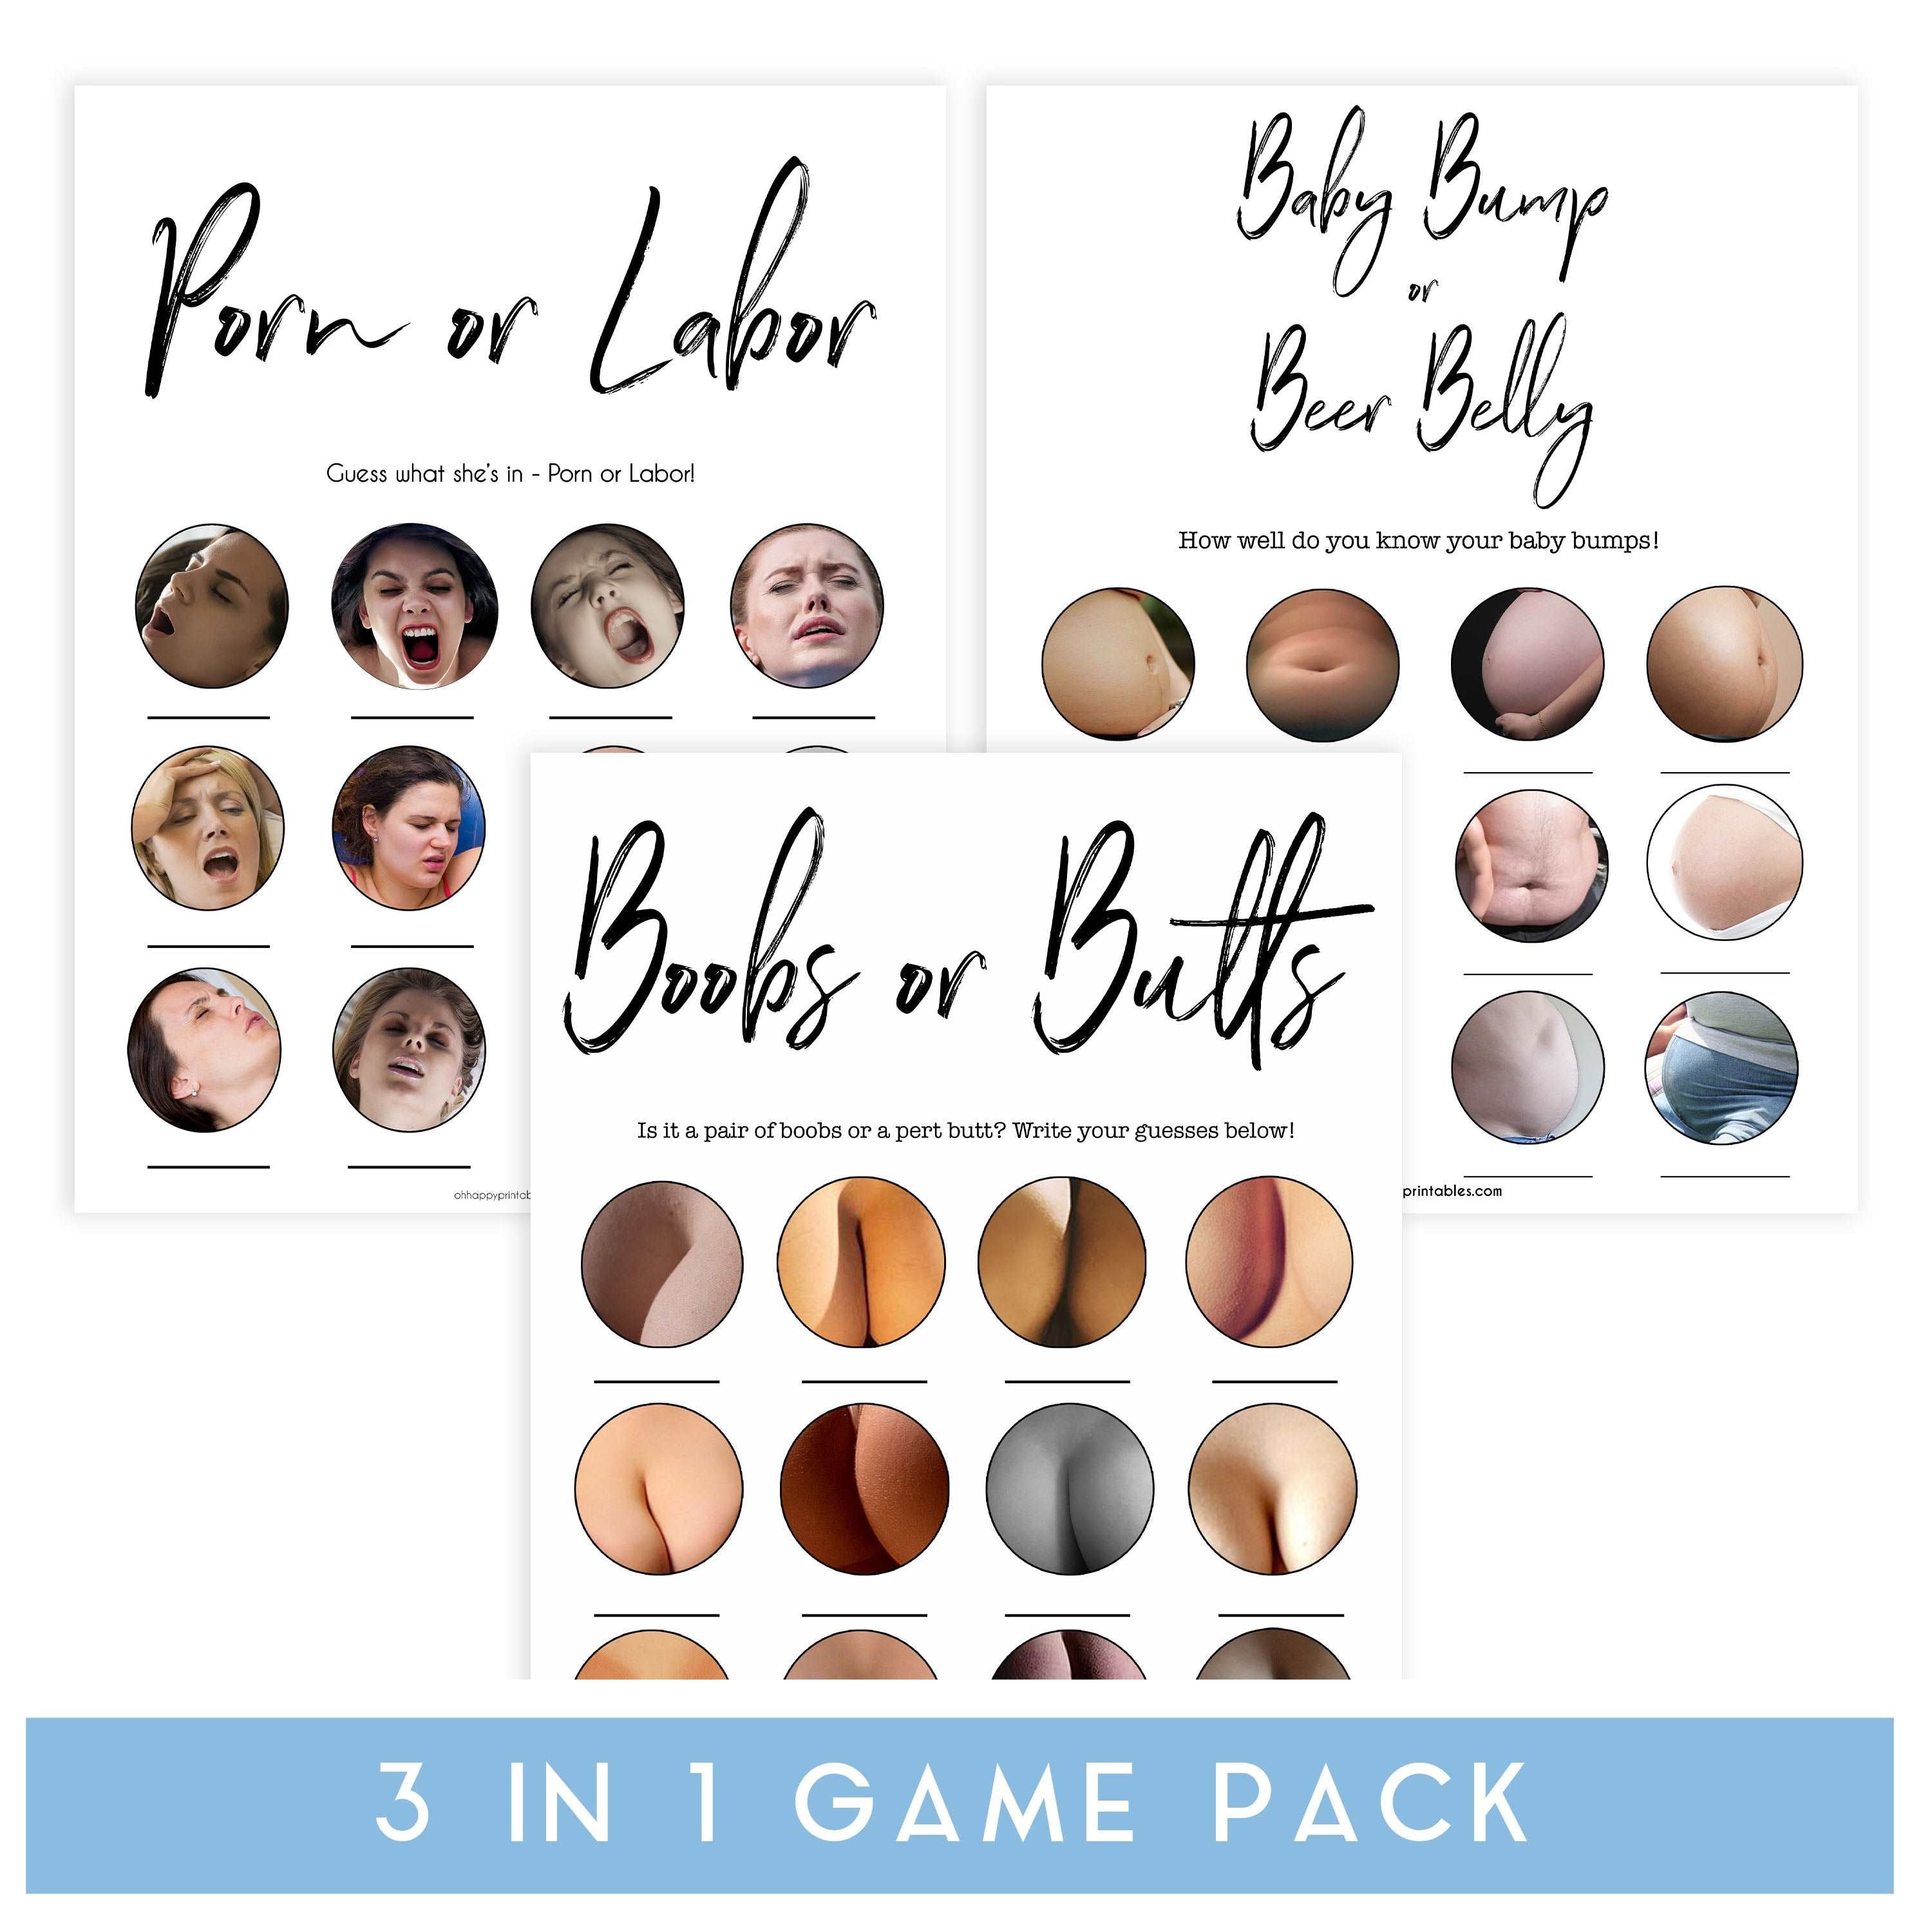 labor or porn, baby bump, boobs or butts game, printable baby shower games, gender neutral baby shower ideas, fun baby game ideas